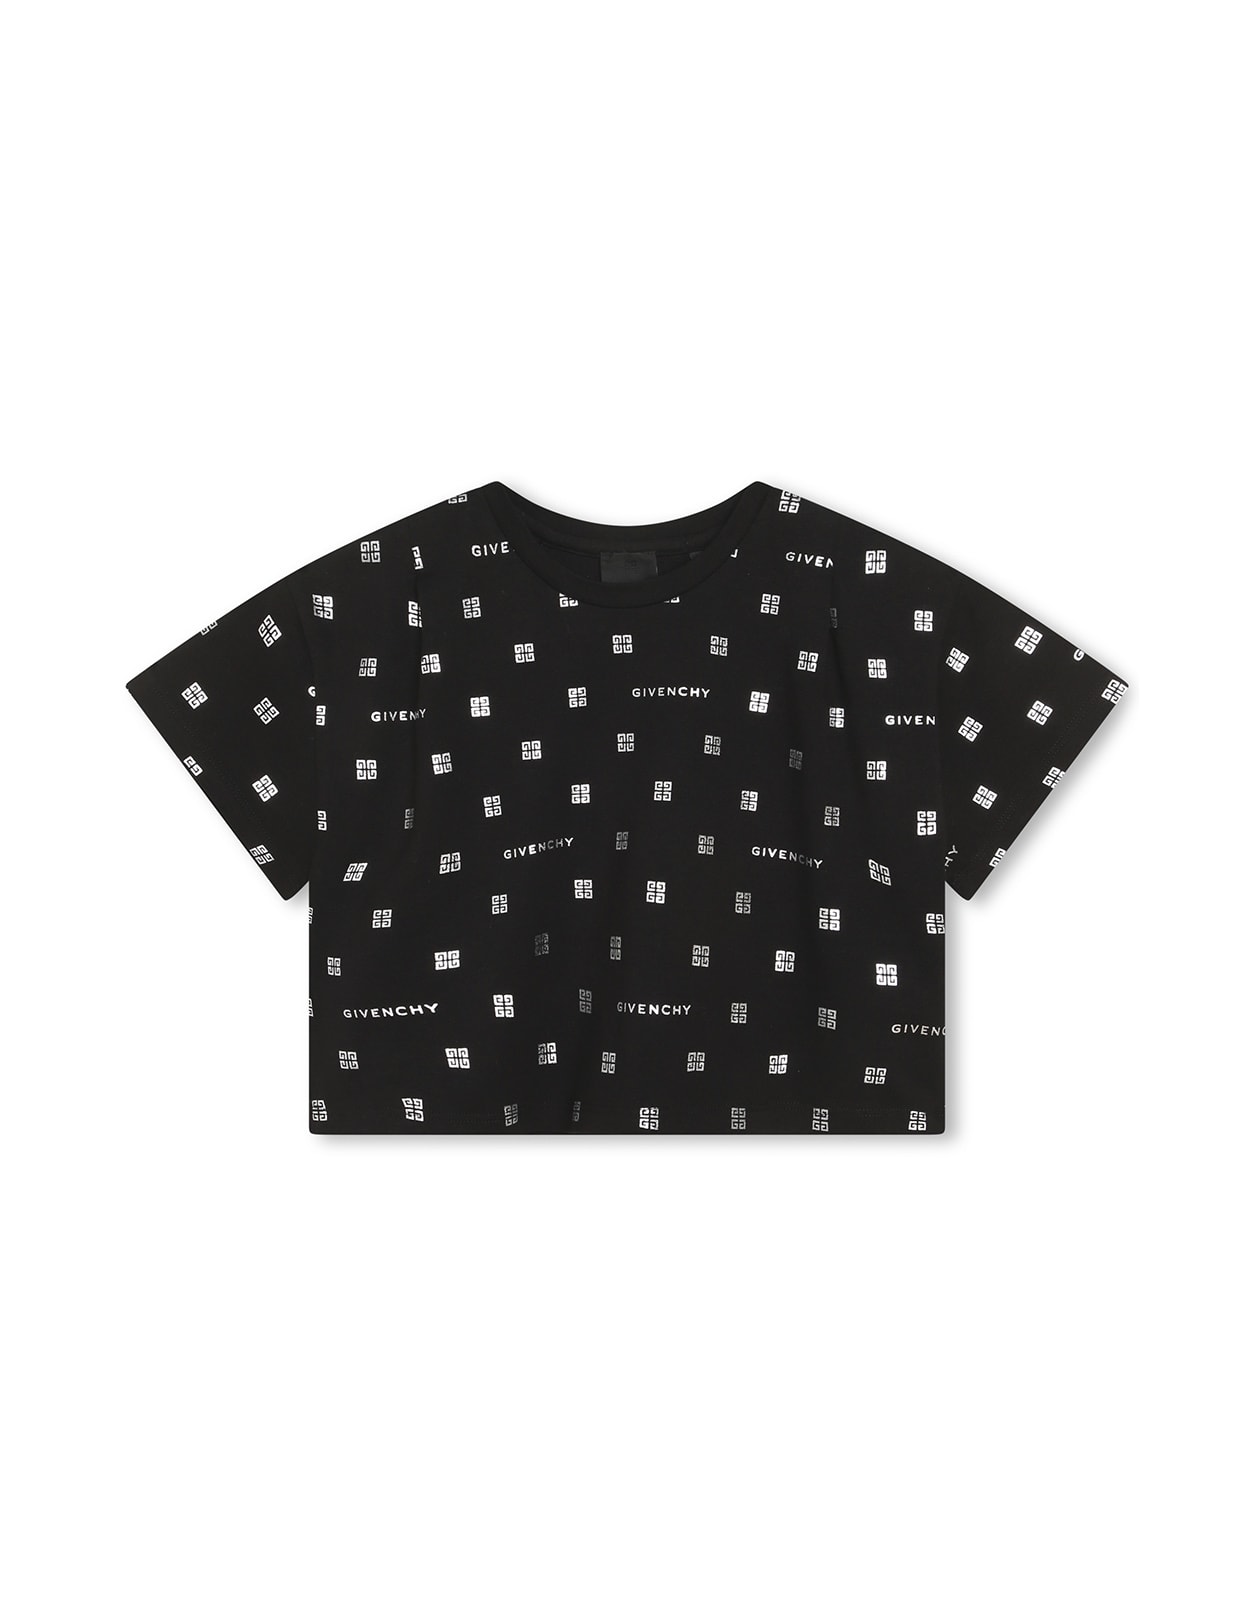 GIVENCHY BLACK T-SHIRT WITH GIVENCHY 4G PATTERN